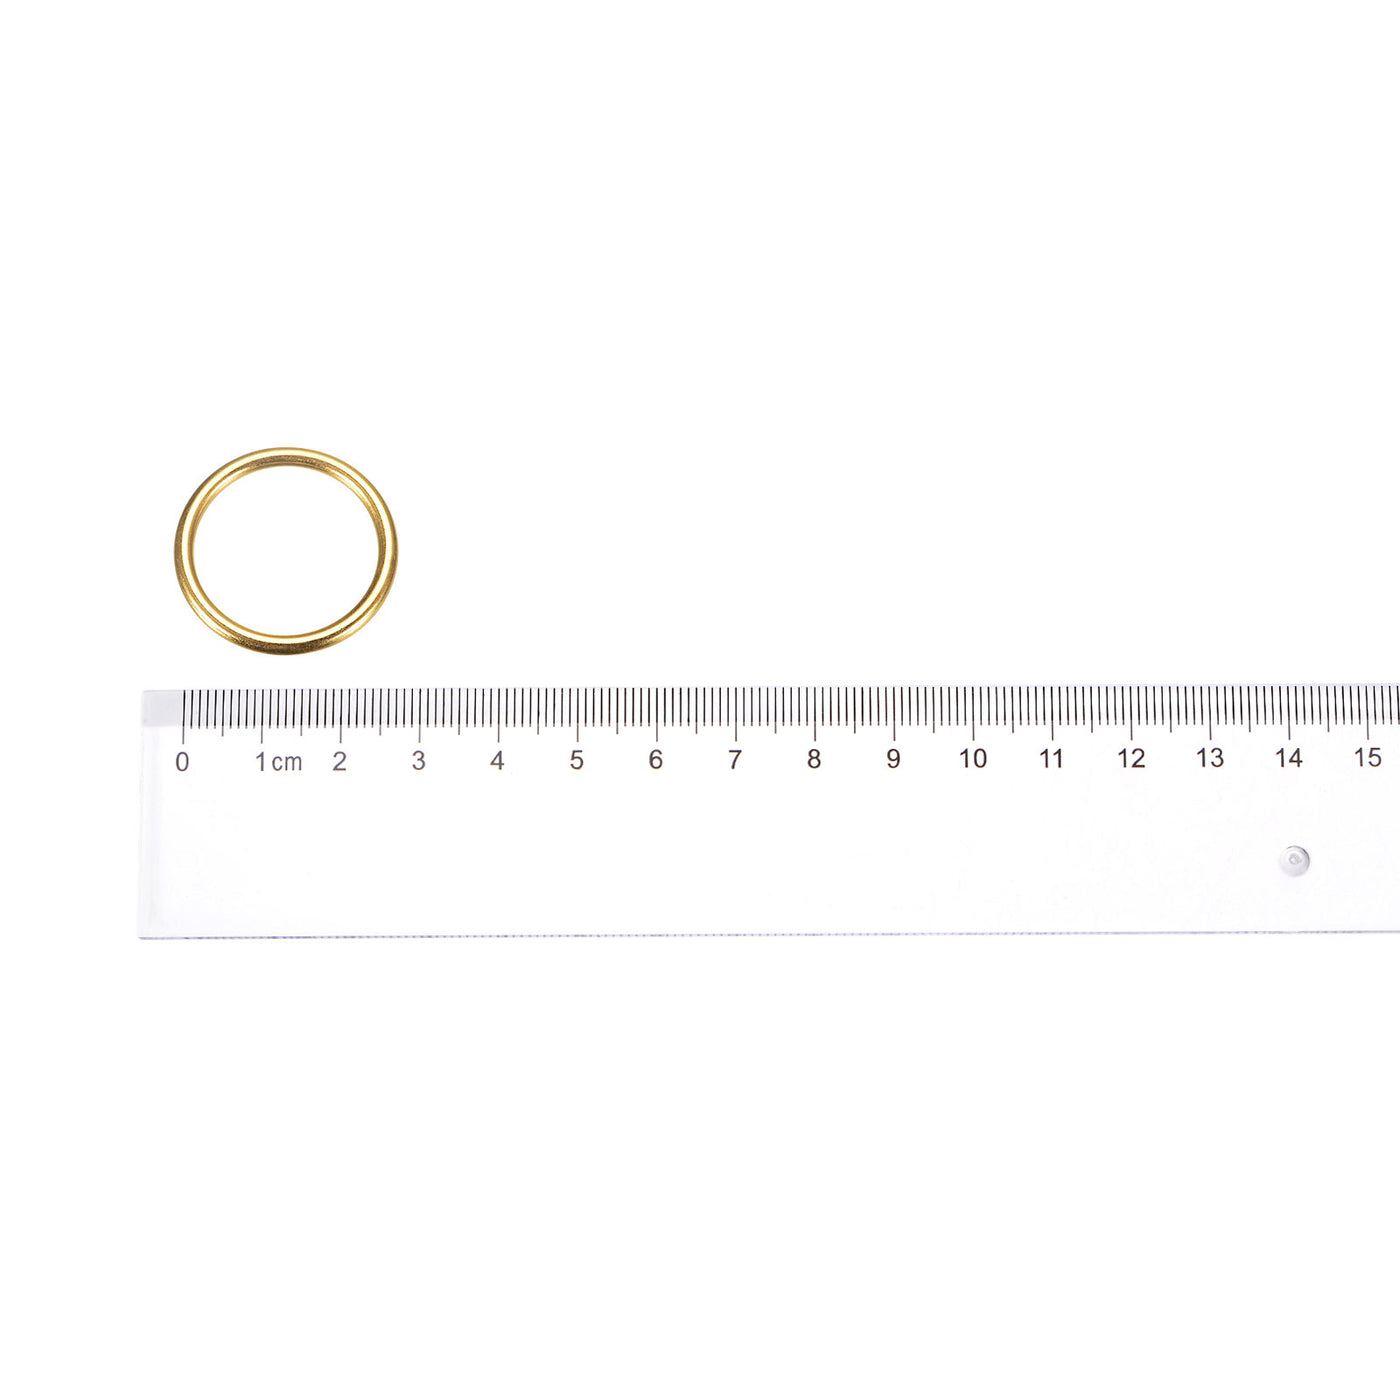 uxcell Uxcell Metal O Rings, 15pcs 25mm(0.98") ID 3mm Thick Welded O-Ringe, Gold Tone